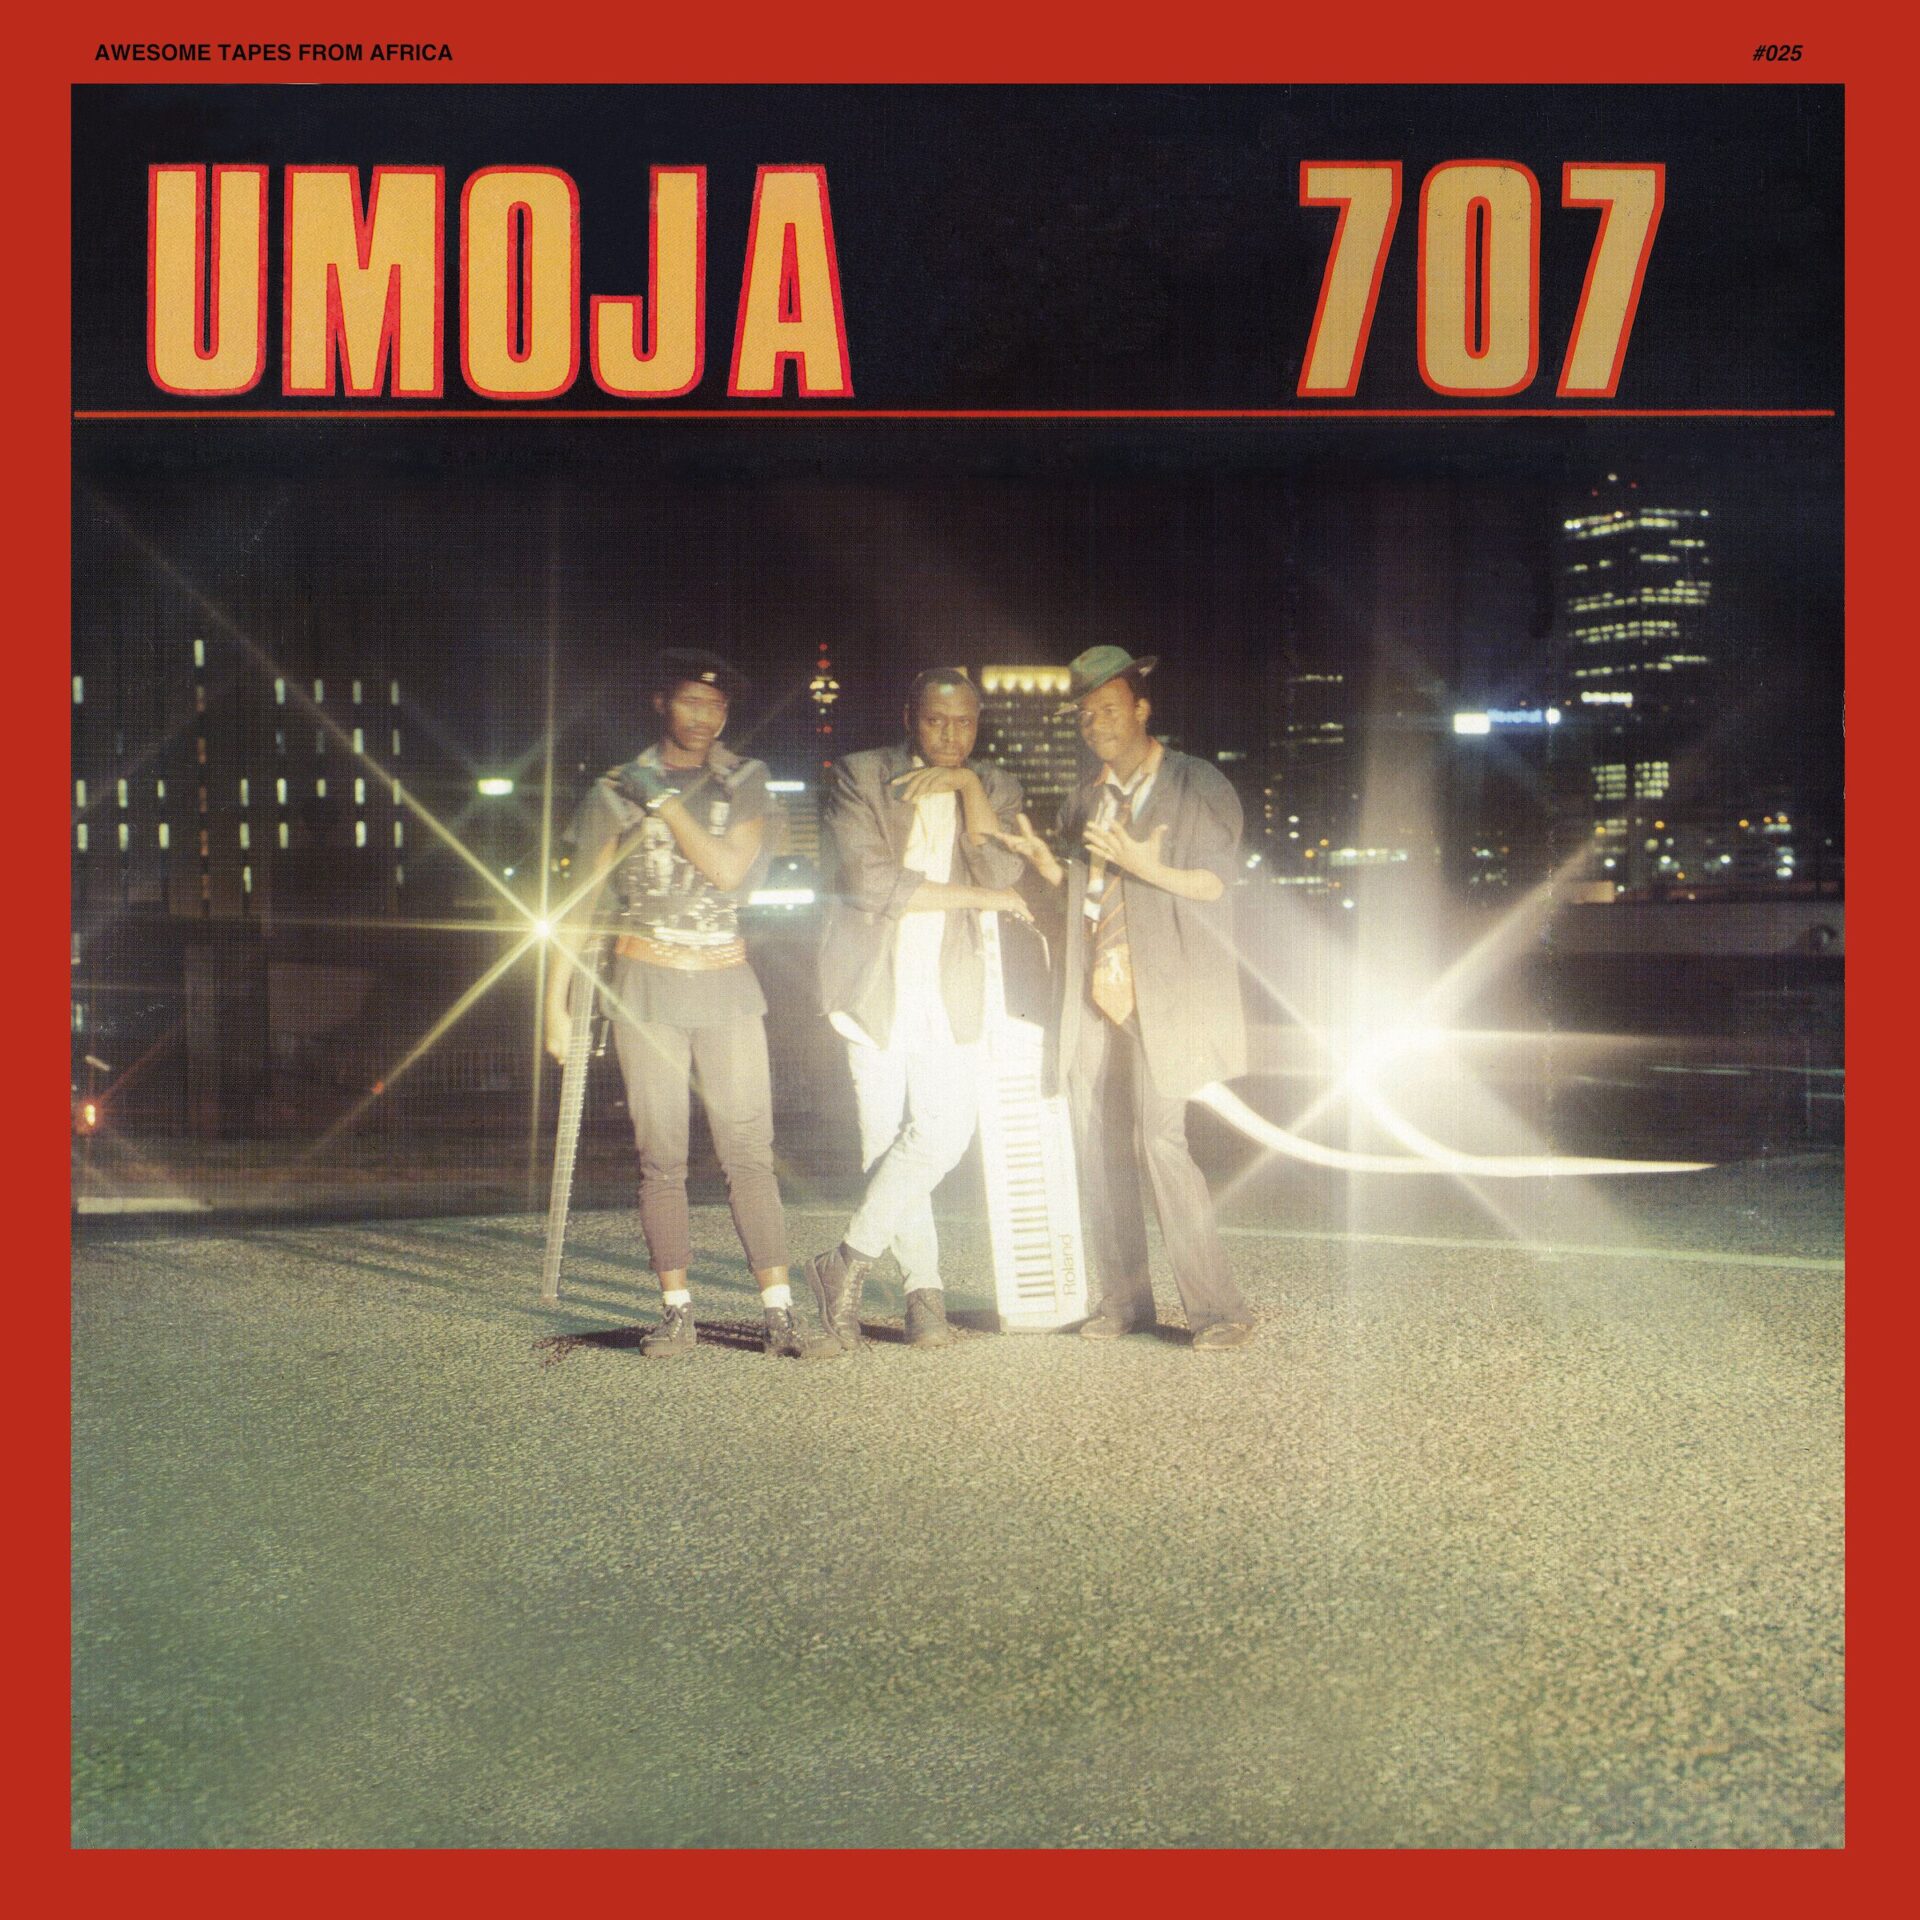 Umoja "707" reissue on Awesome Tapes From Africa